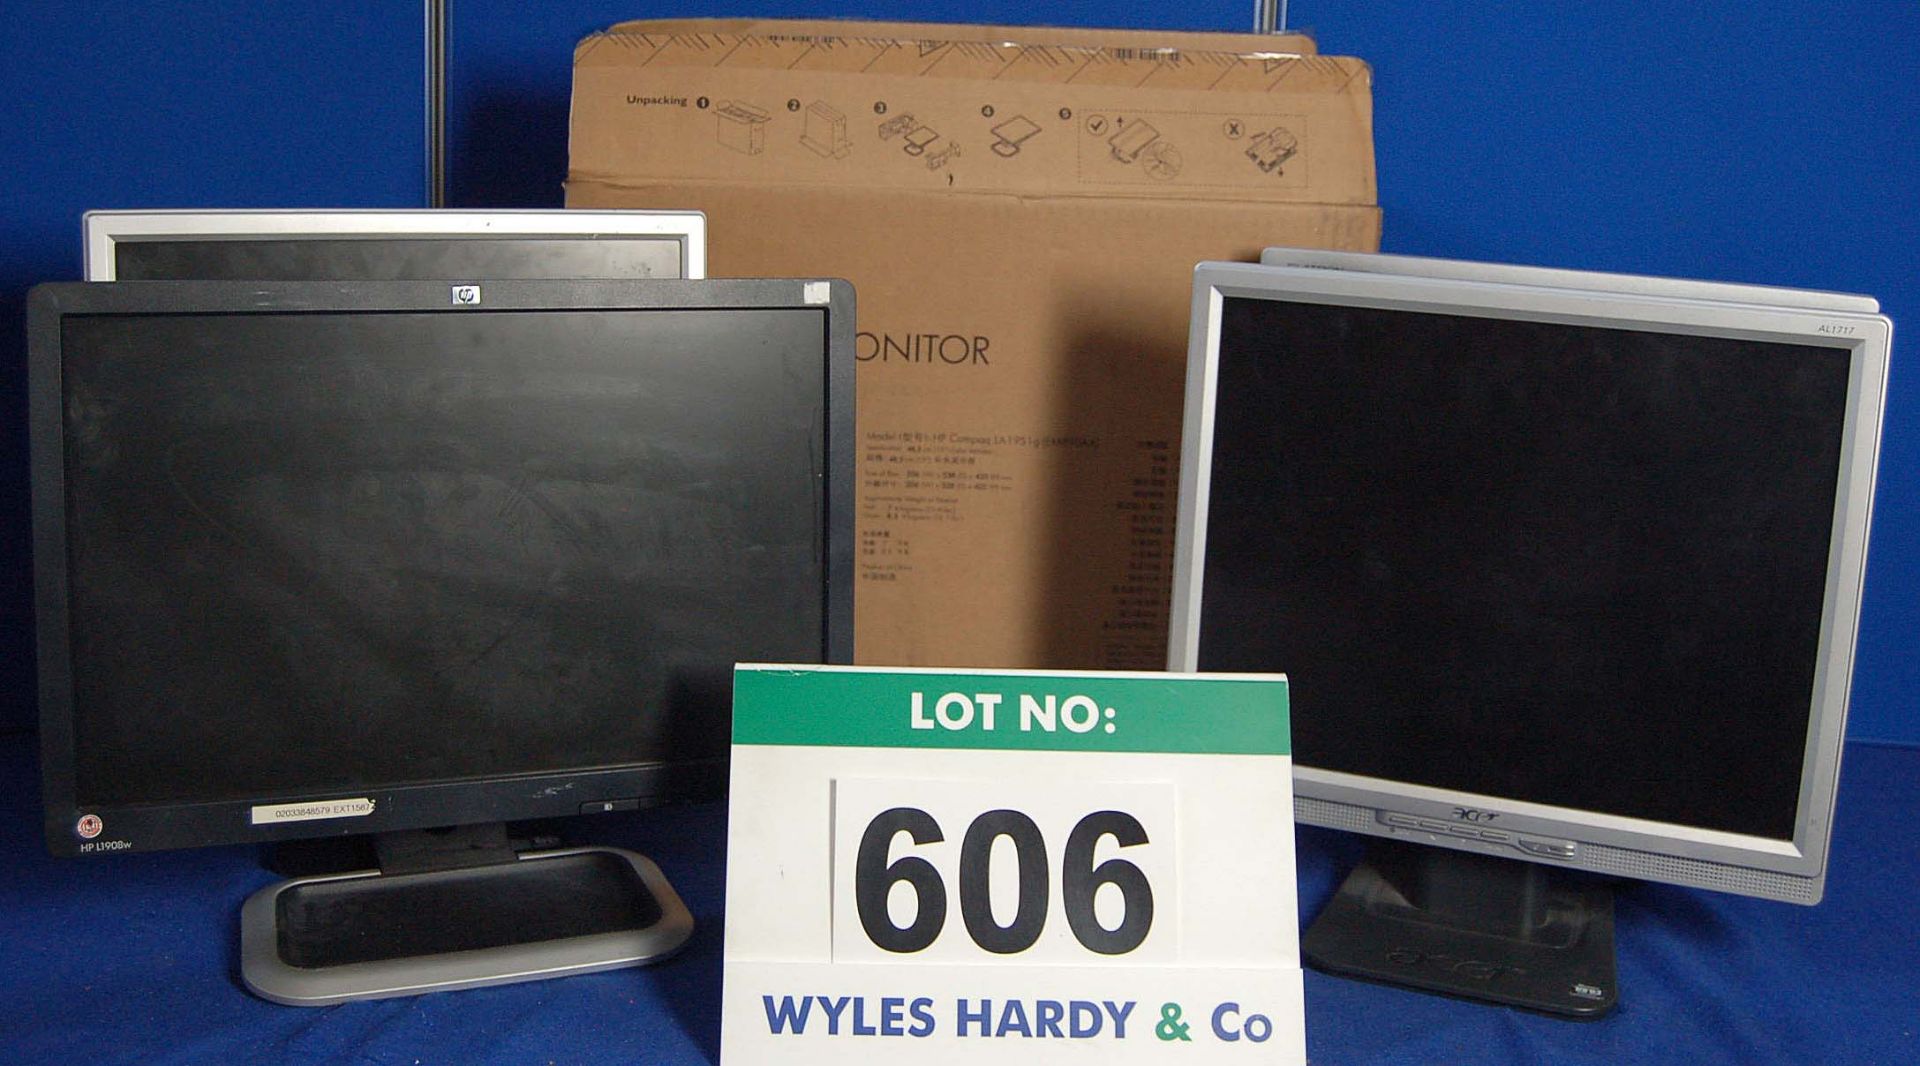 Two HEWLETT PACKARD, Two ACER & An LG 17 inch Flat Screen Displays